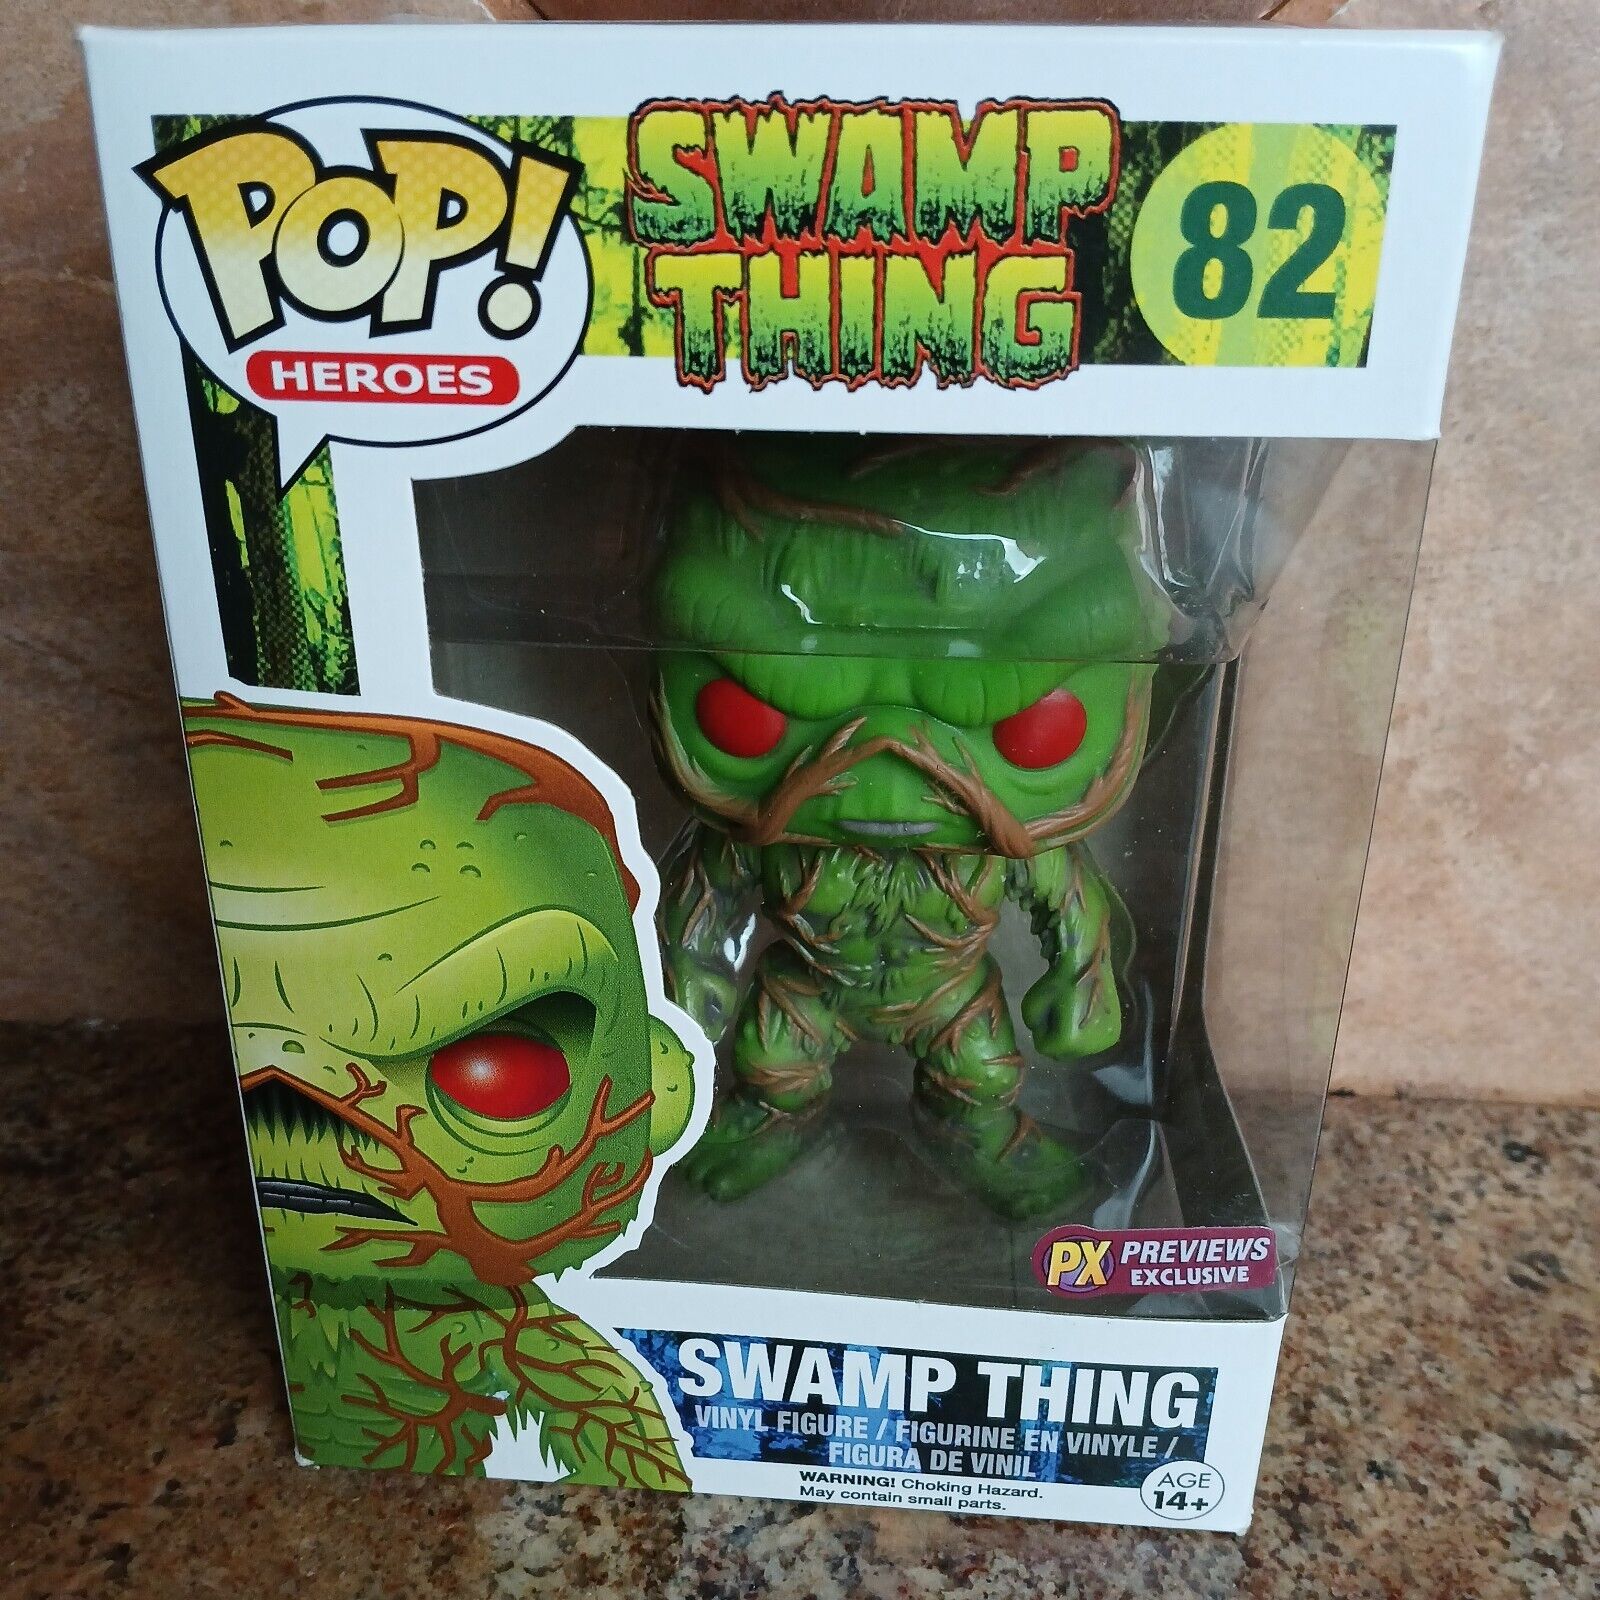 VAULTED Funko POP Heroes SWAMP THING #82 PX Previews Exclusive with PROTECTOR